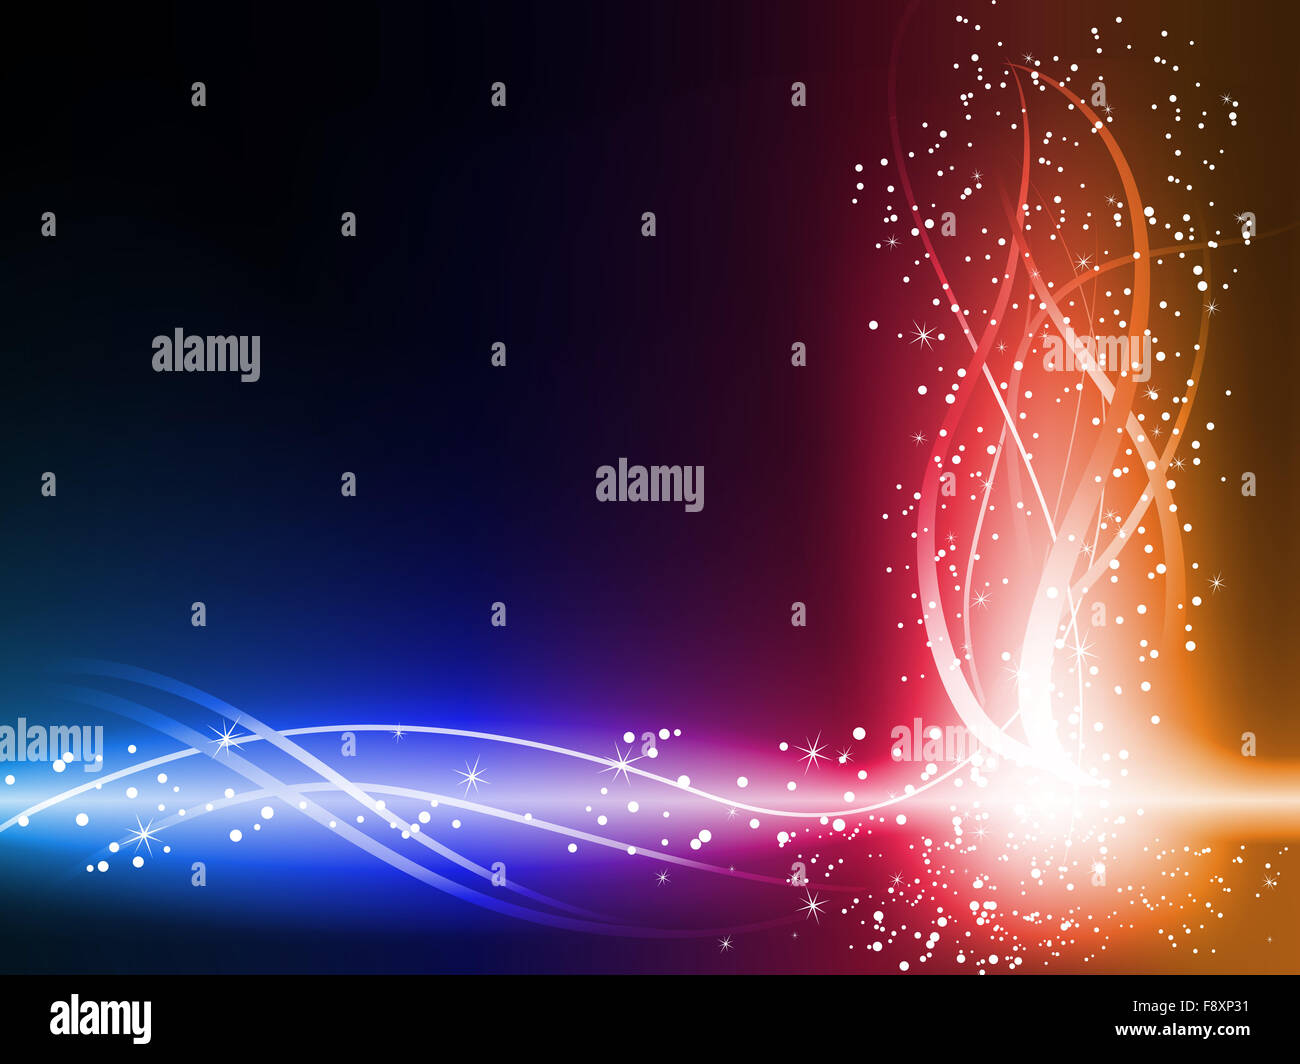 Colorful Fantasy Glowing Lines Background. Stock Photo